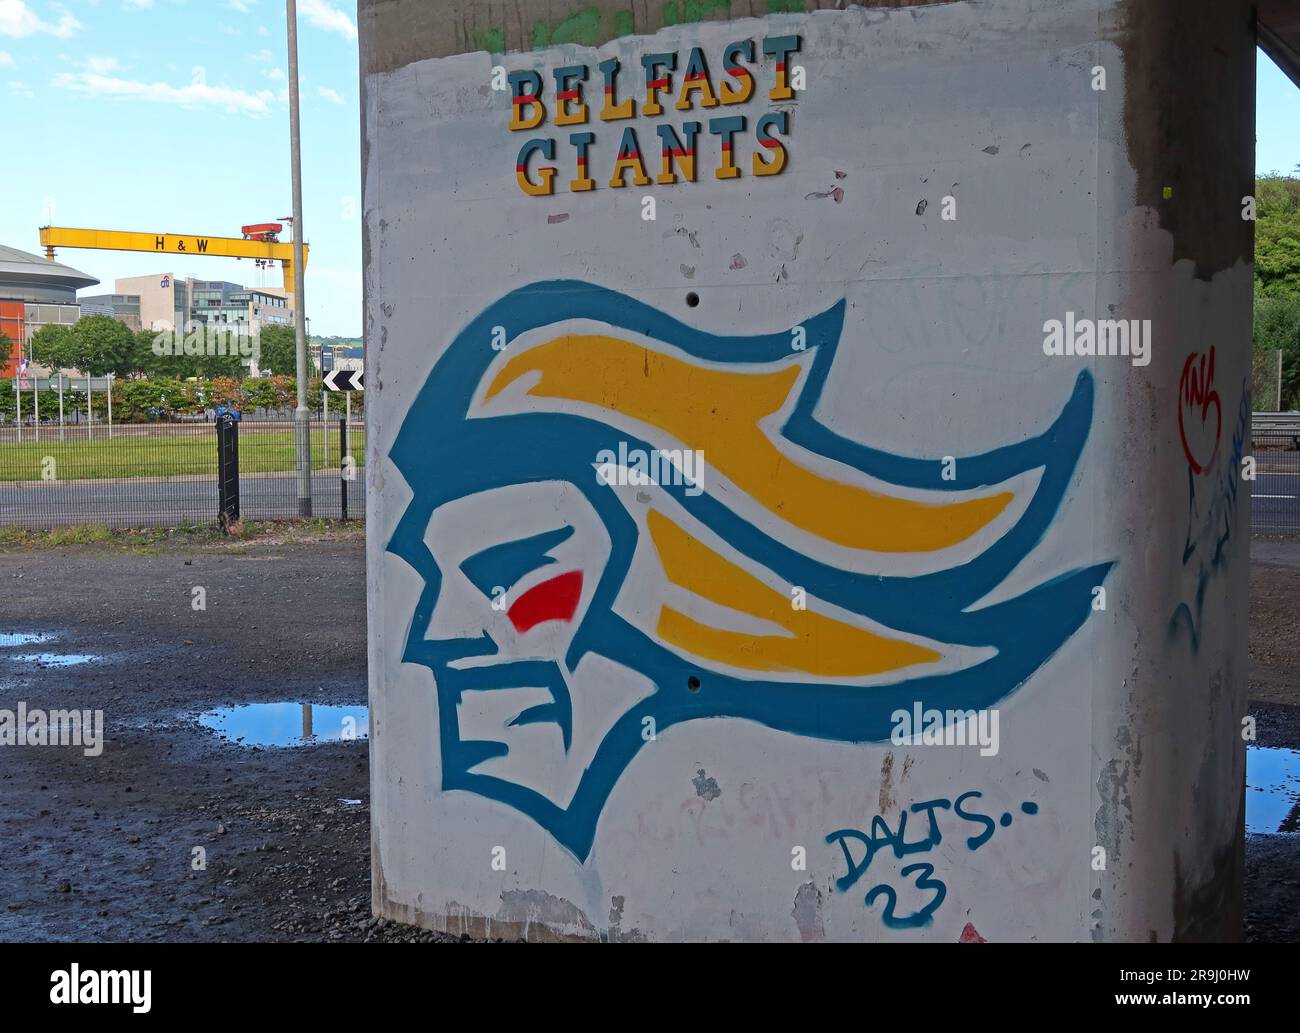 Belfast Giants graffiti from Dalts 23, riverside, Titanic Quarter, within sight of the H&W Harland & Wolff cranes Samson and Goliath & SSE Arena Stock Photo